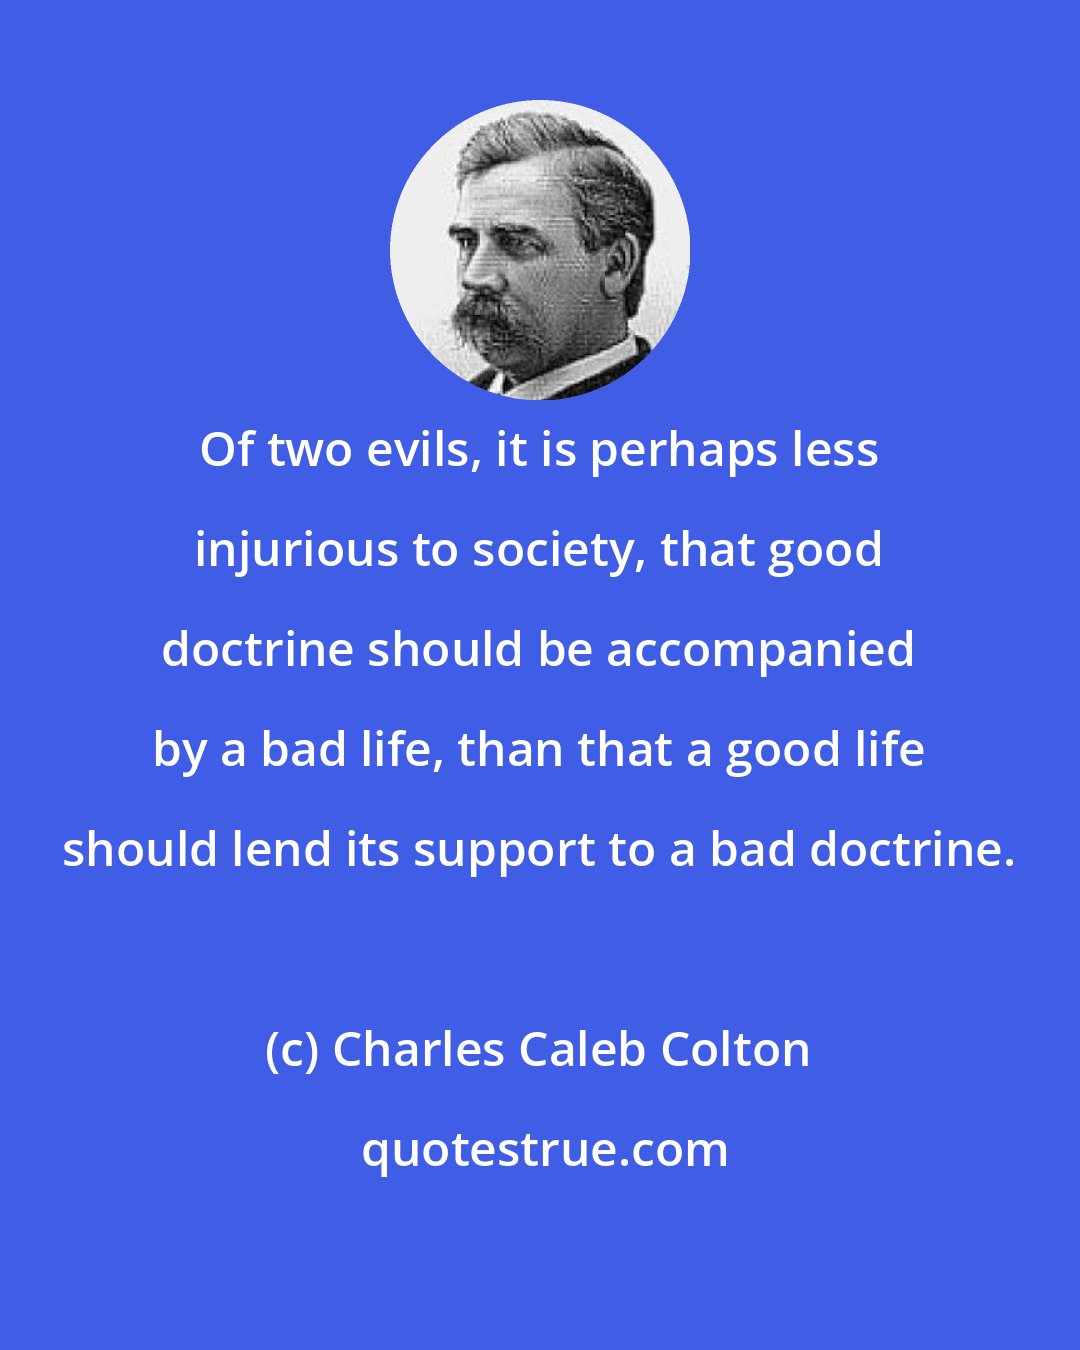 Charles Caleb Colton: Of two evils, it is perhaps less injurious to society, that good doctrine should be accompanied by a bad life, than that a good life should lend its support to a bad doctrine.